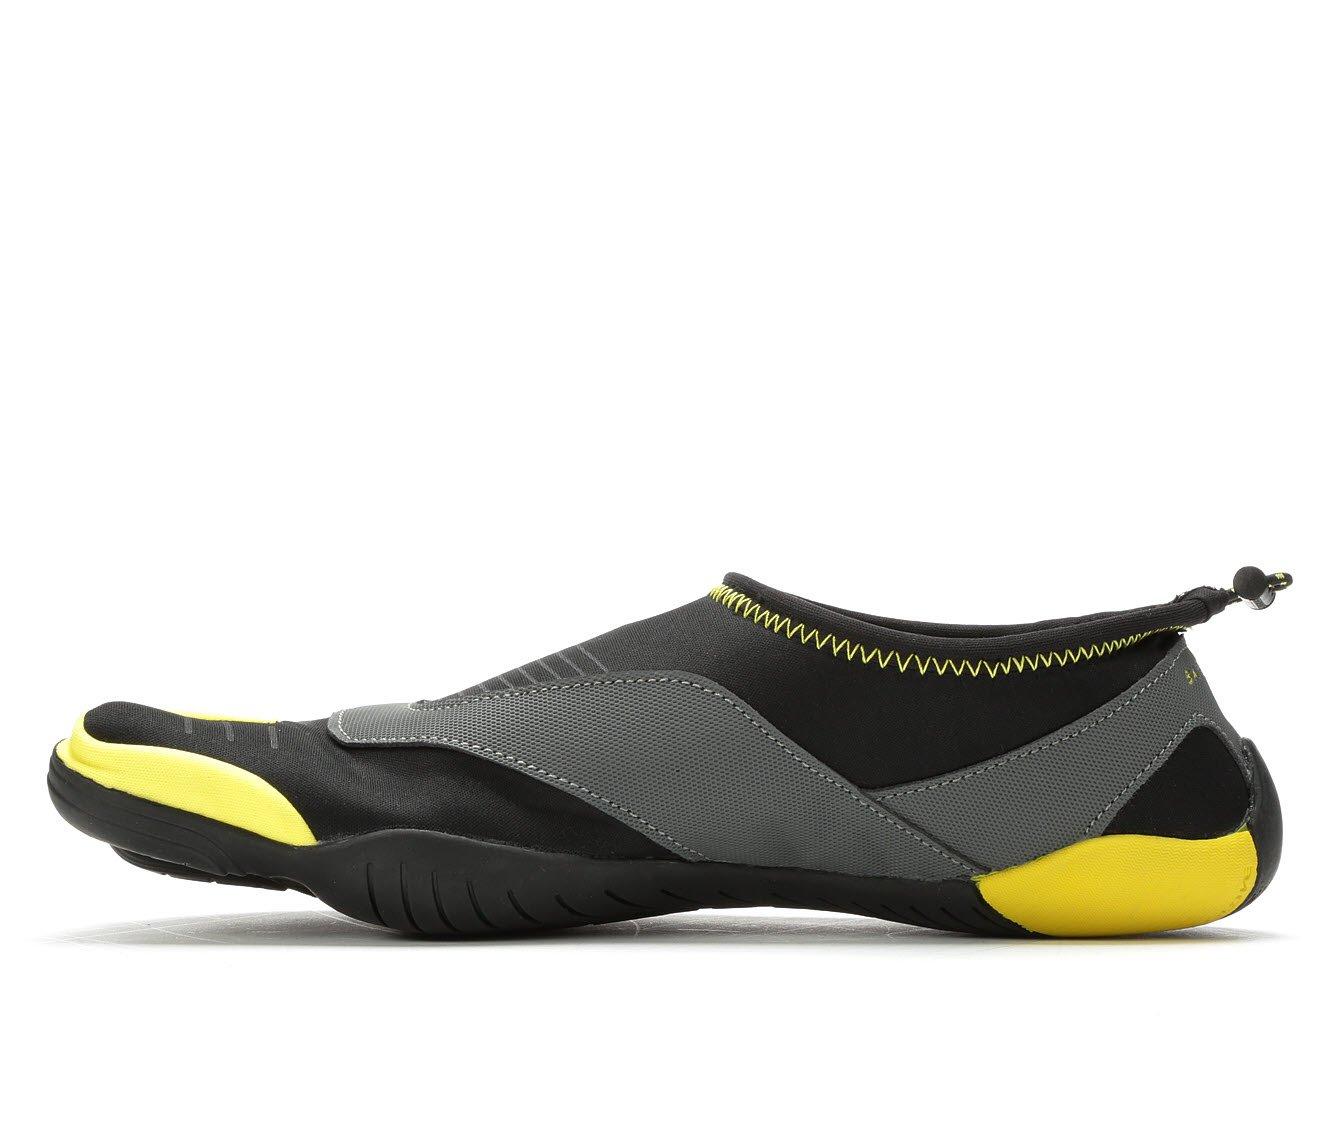 Men's 3T Barefoot Max Water Shoes - Black/Yellow - Body Glove